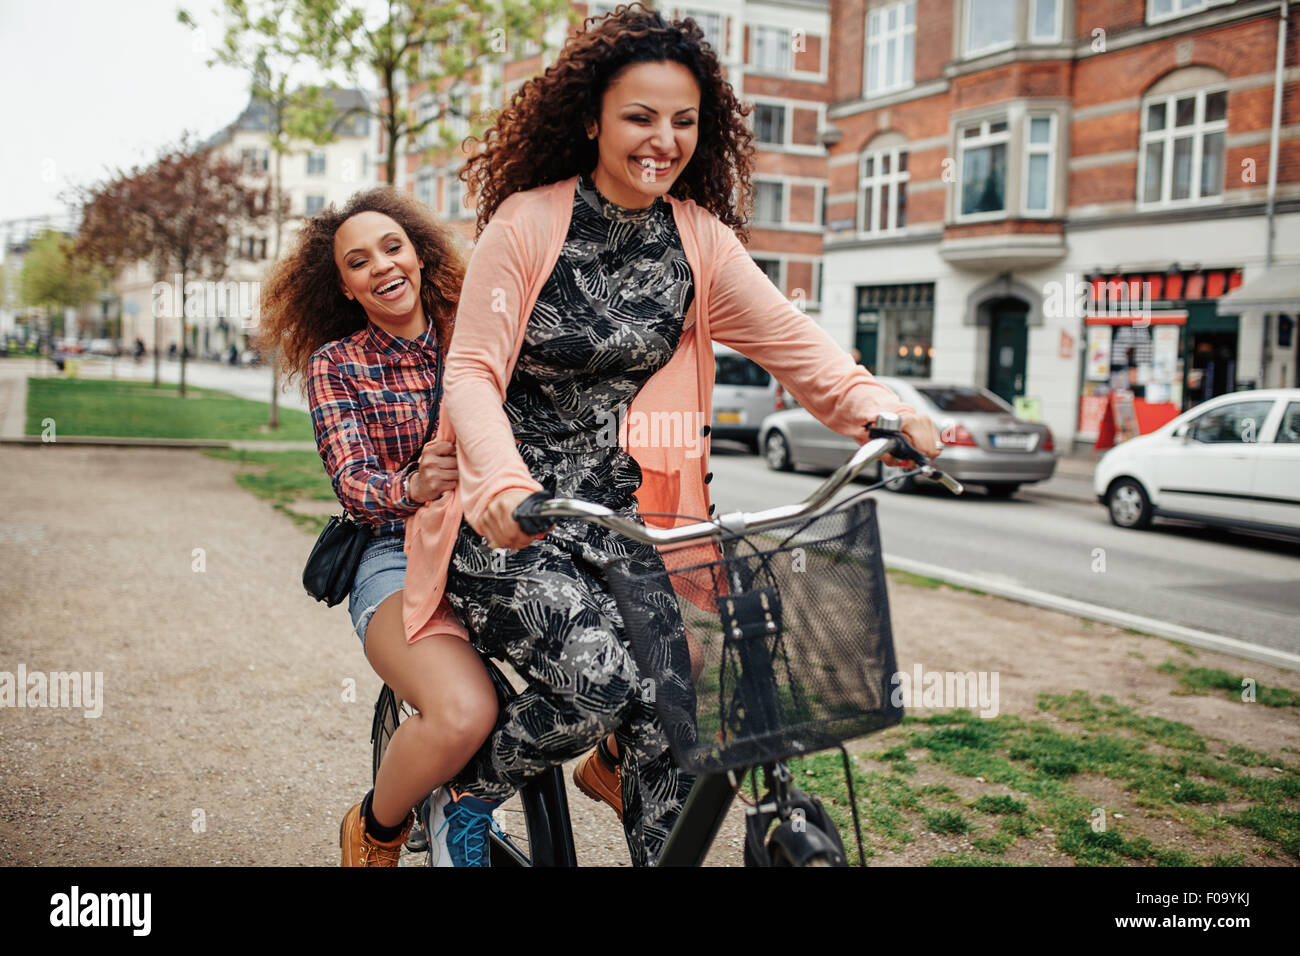 Two young women together on one bicycle having fun. Cheerful young girls enjoying cycle ride on city street. Stock Photo